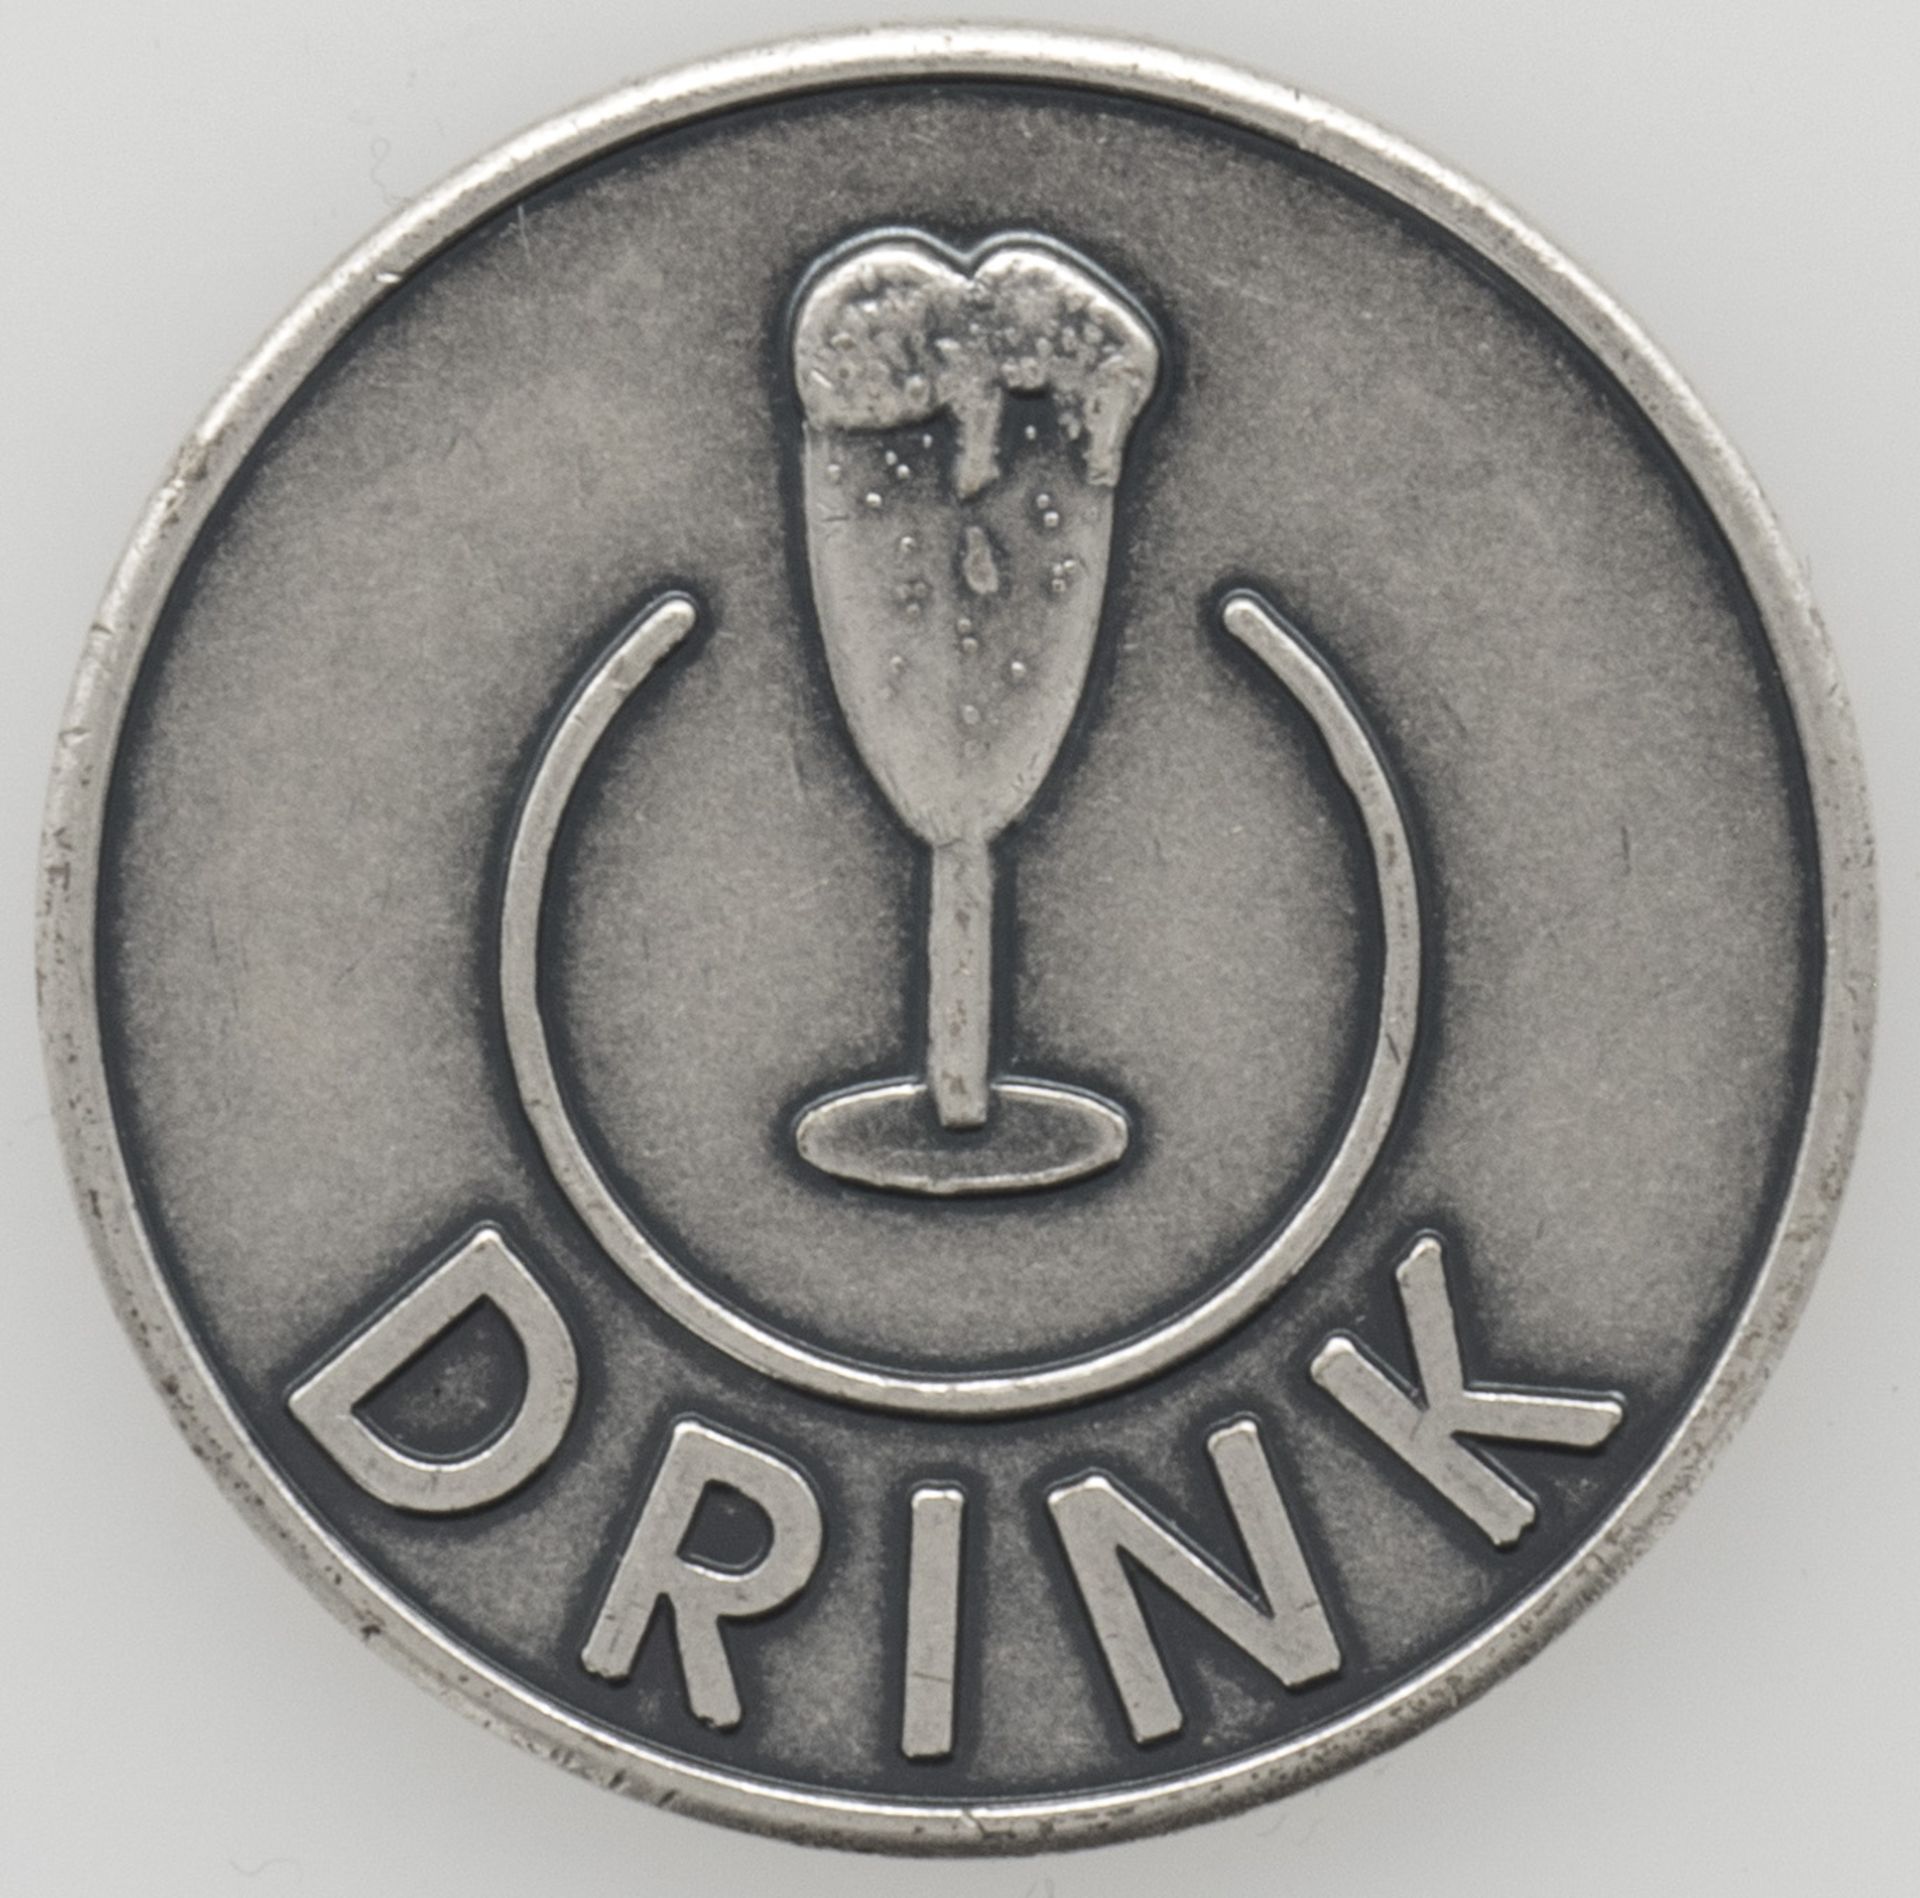 Medaille "Drink or drive"